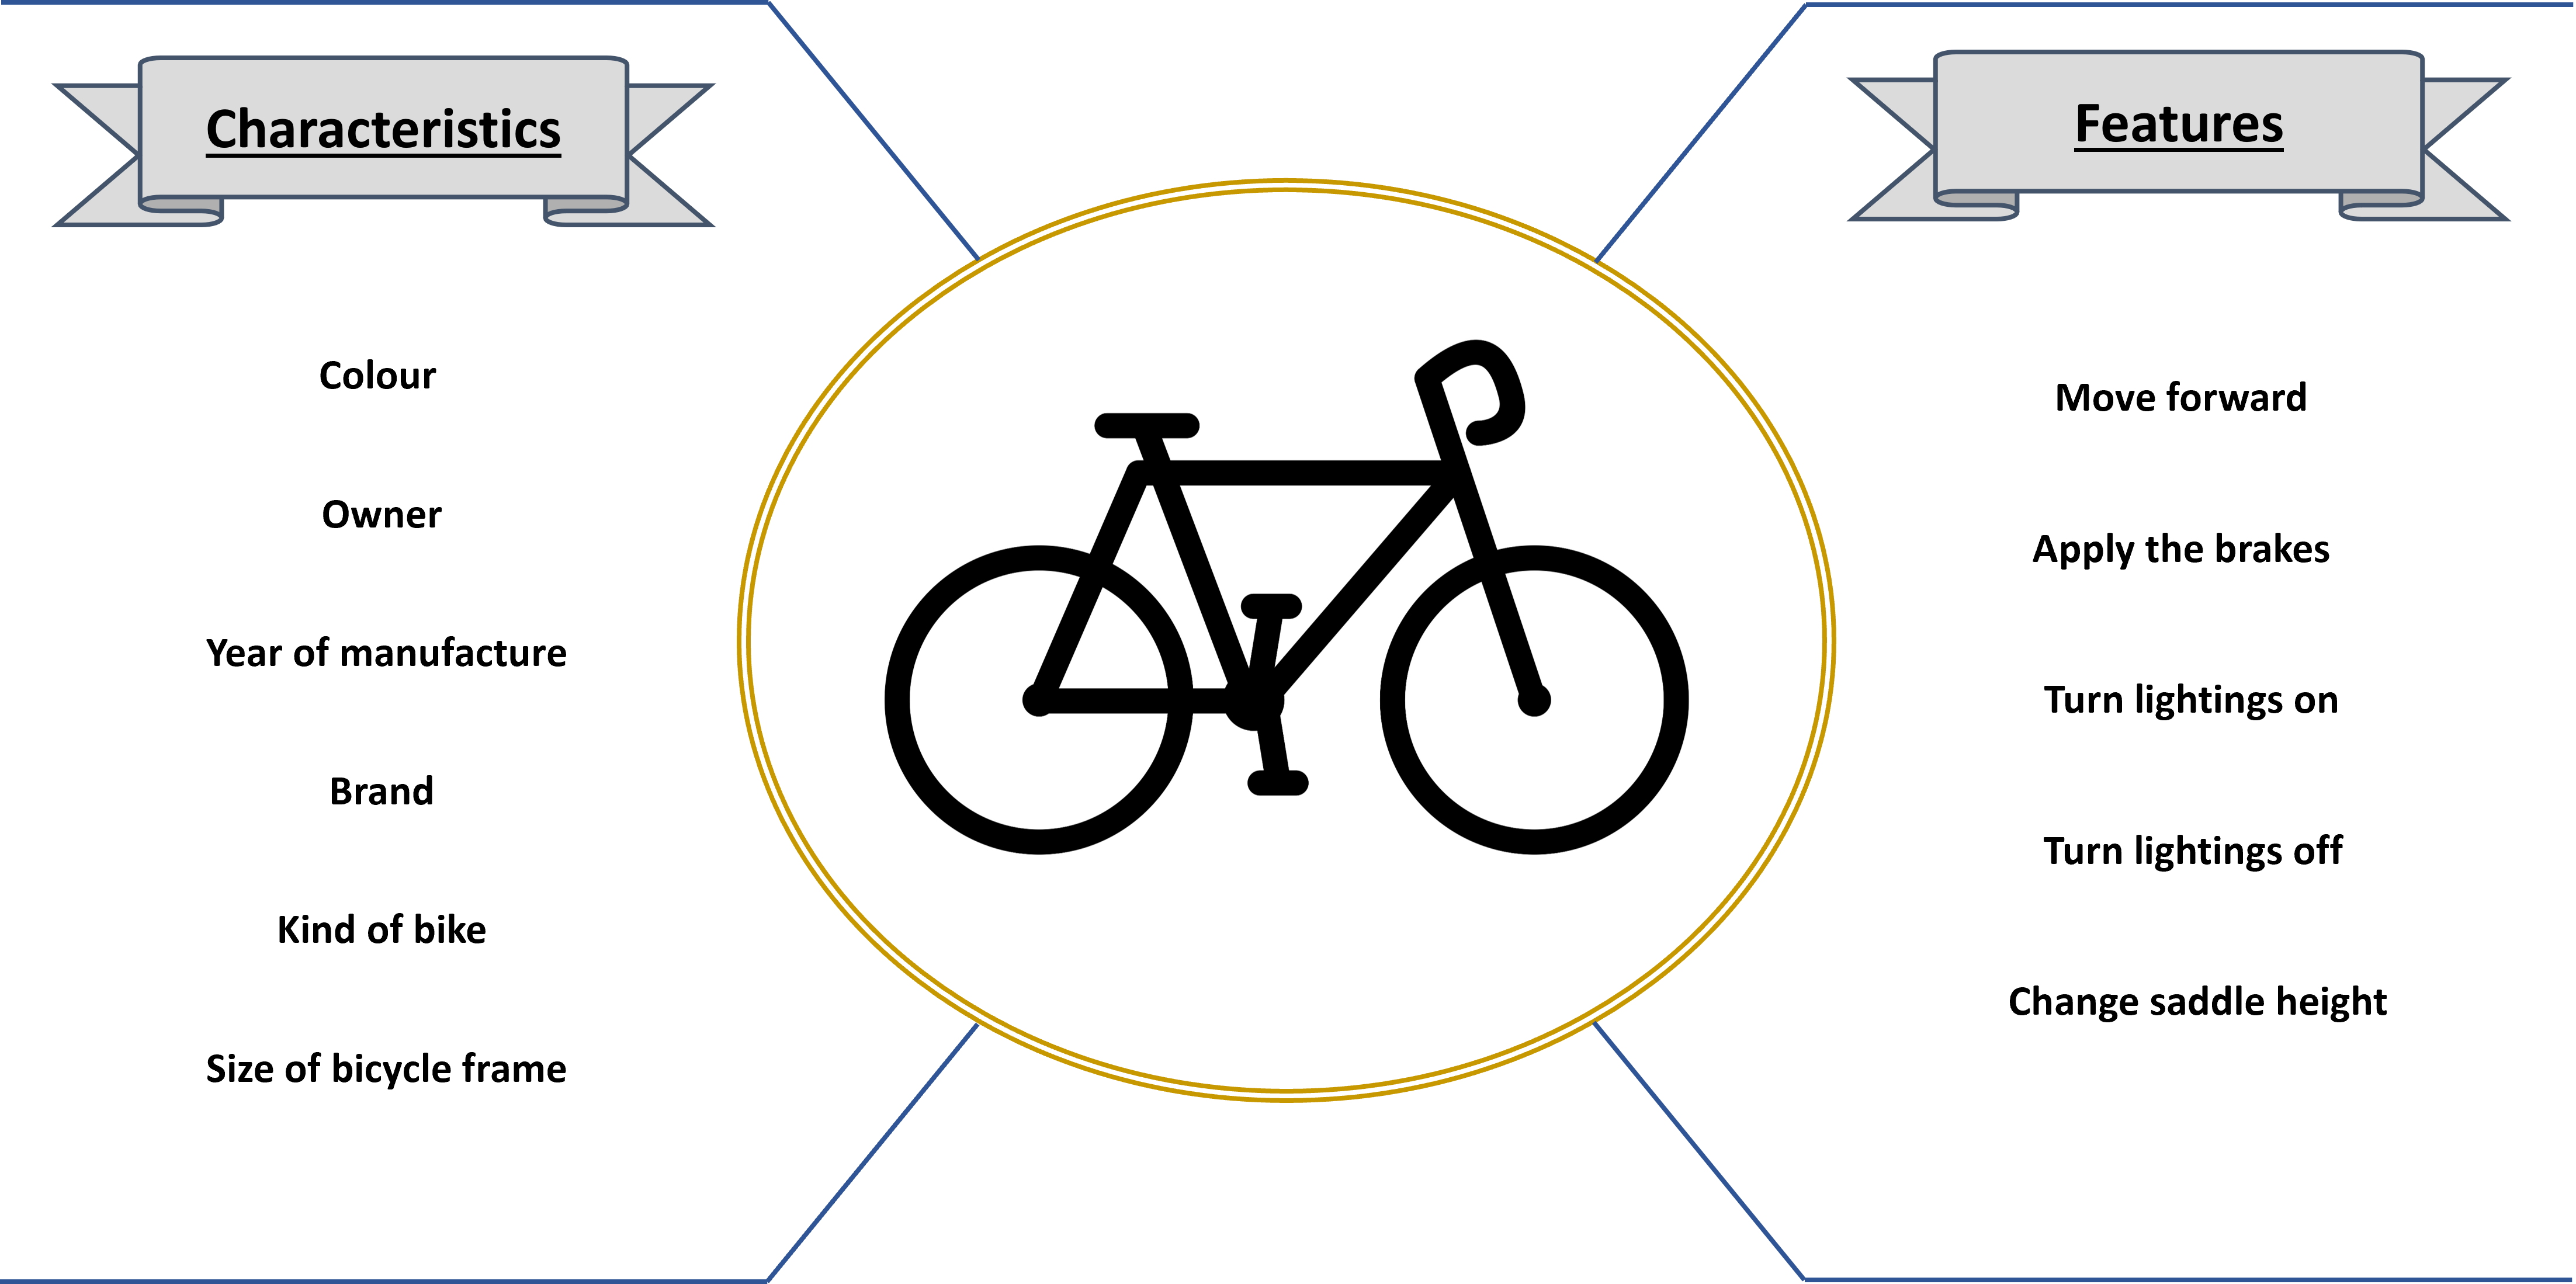 Example illustration of features and characteristics of a bike that could be thought of in a object oriented point of view